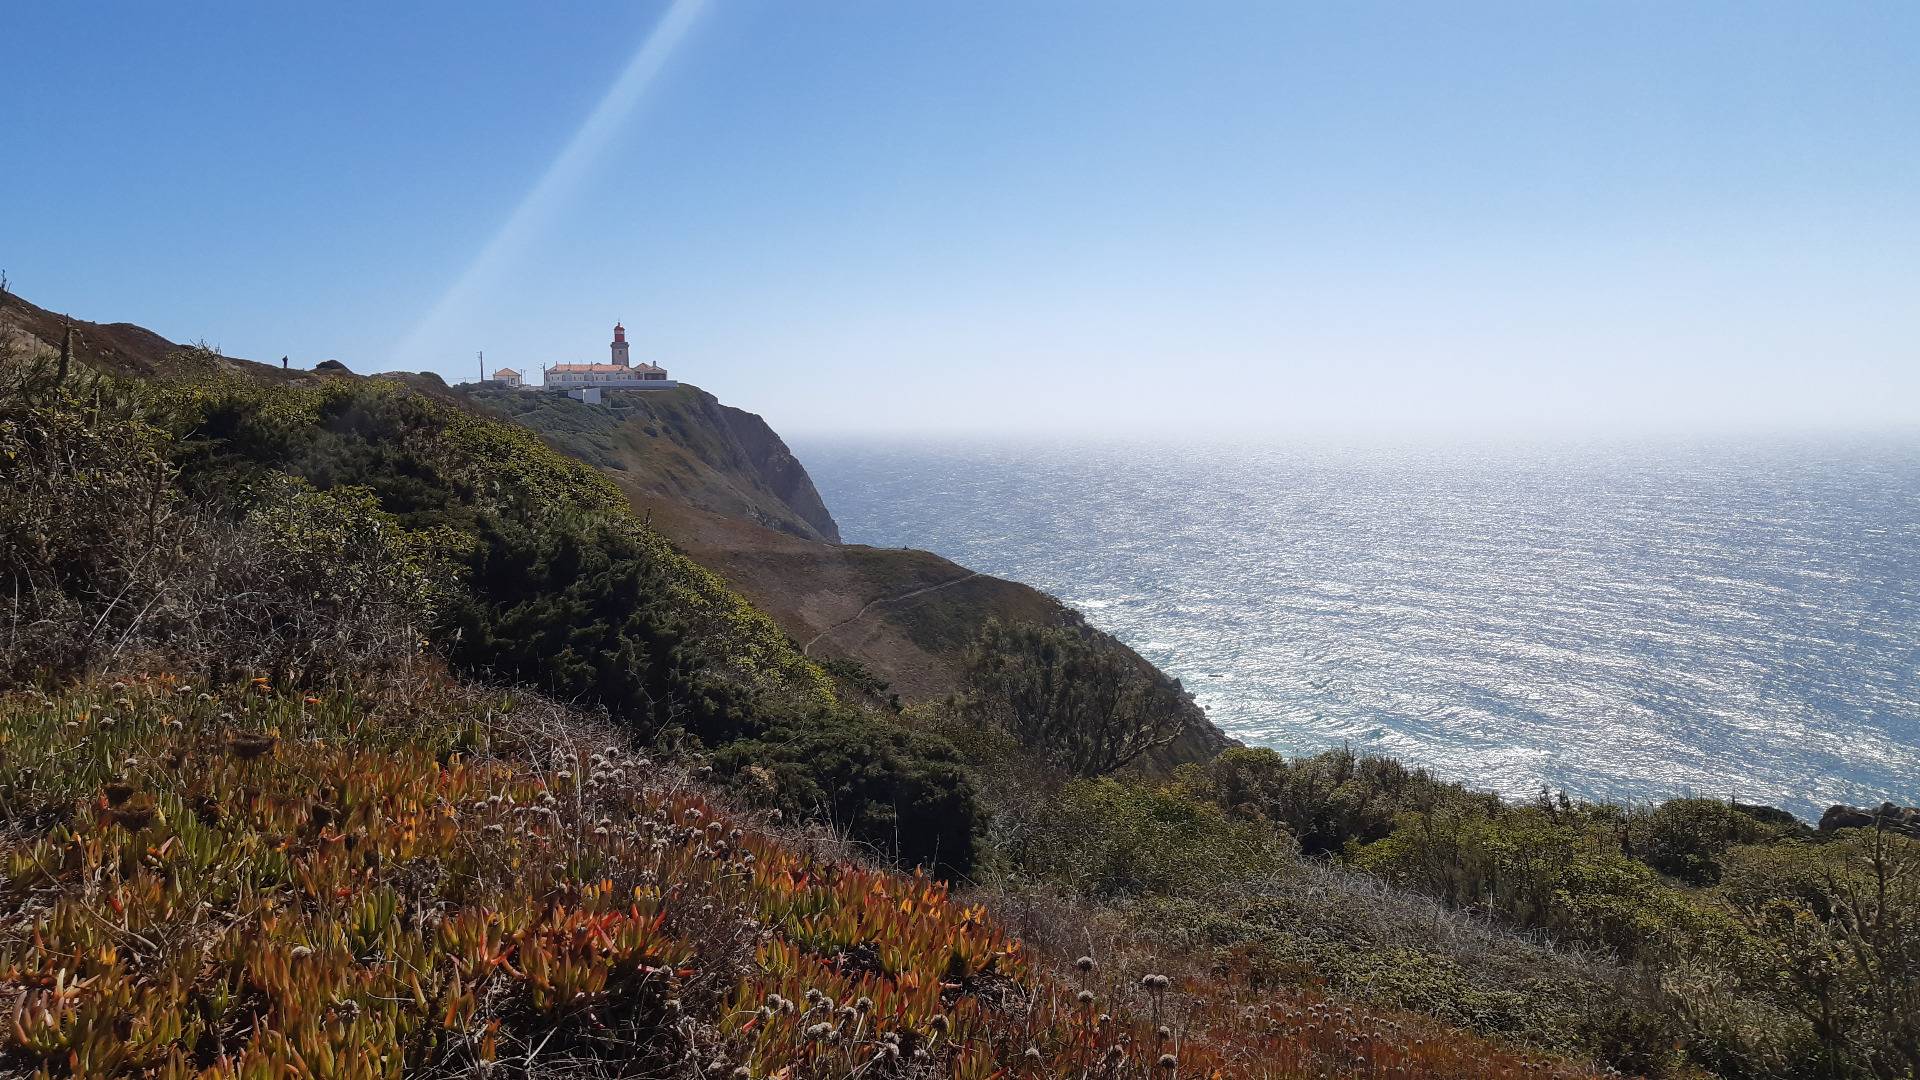 Cabo da Roca, with its lighthouse